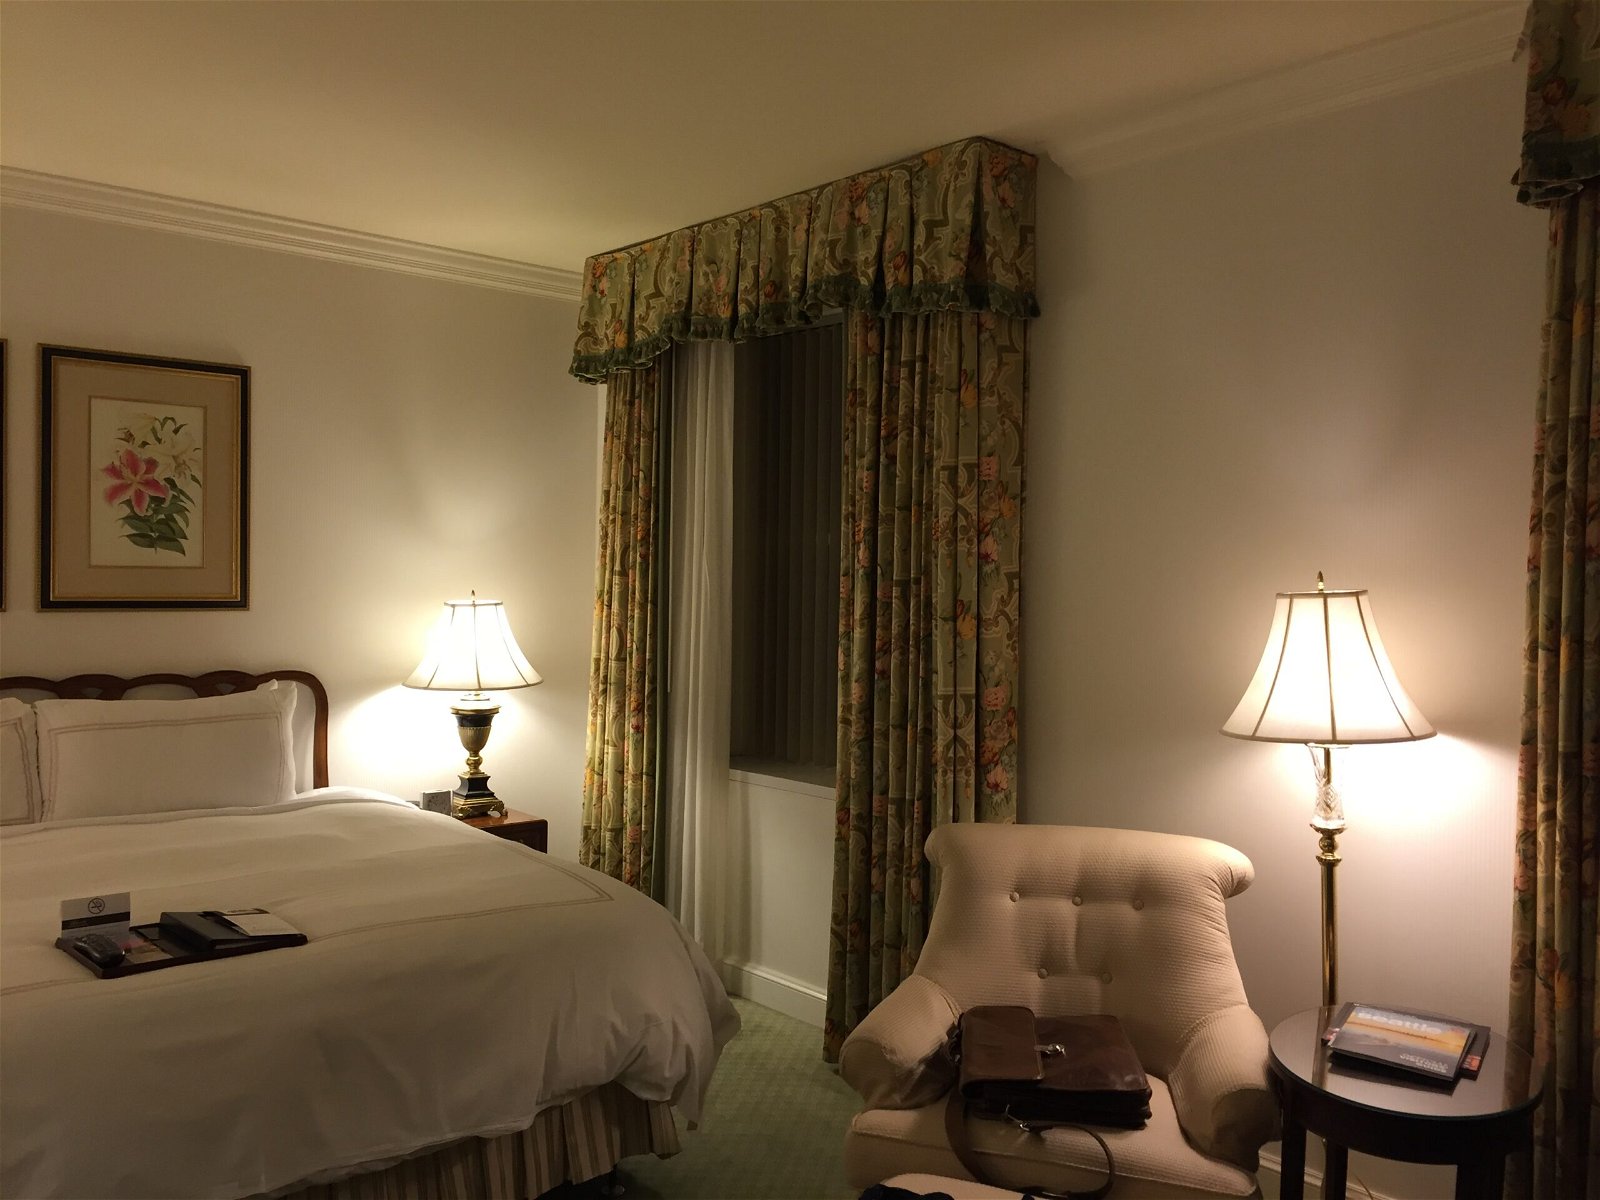 Fairmont Olympic Deluxe Room pre-renovation